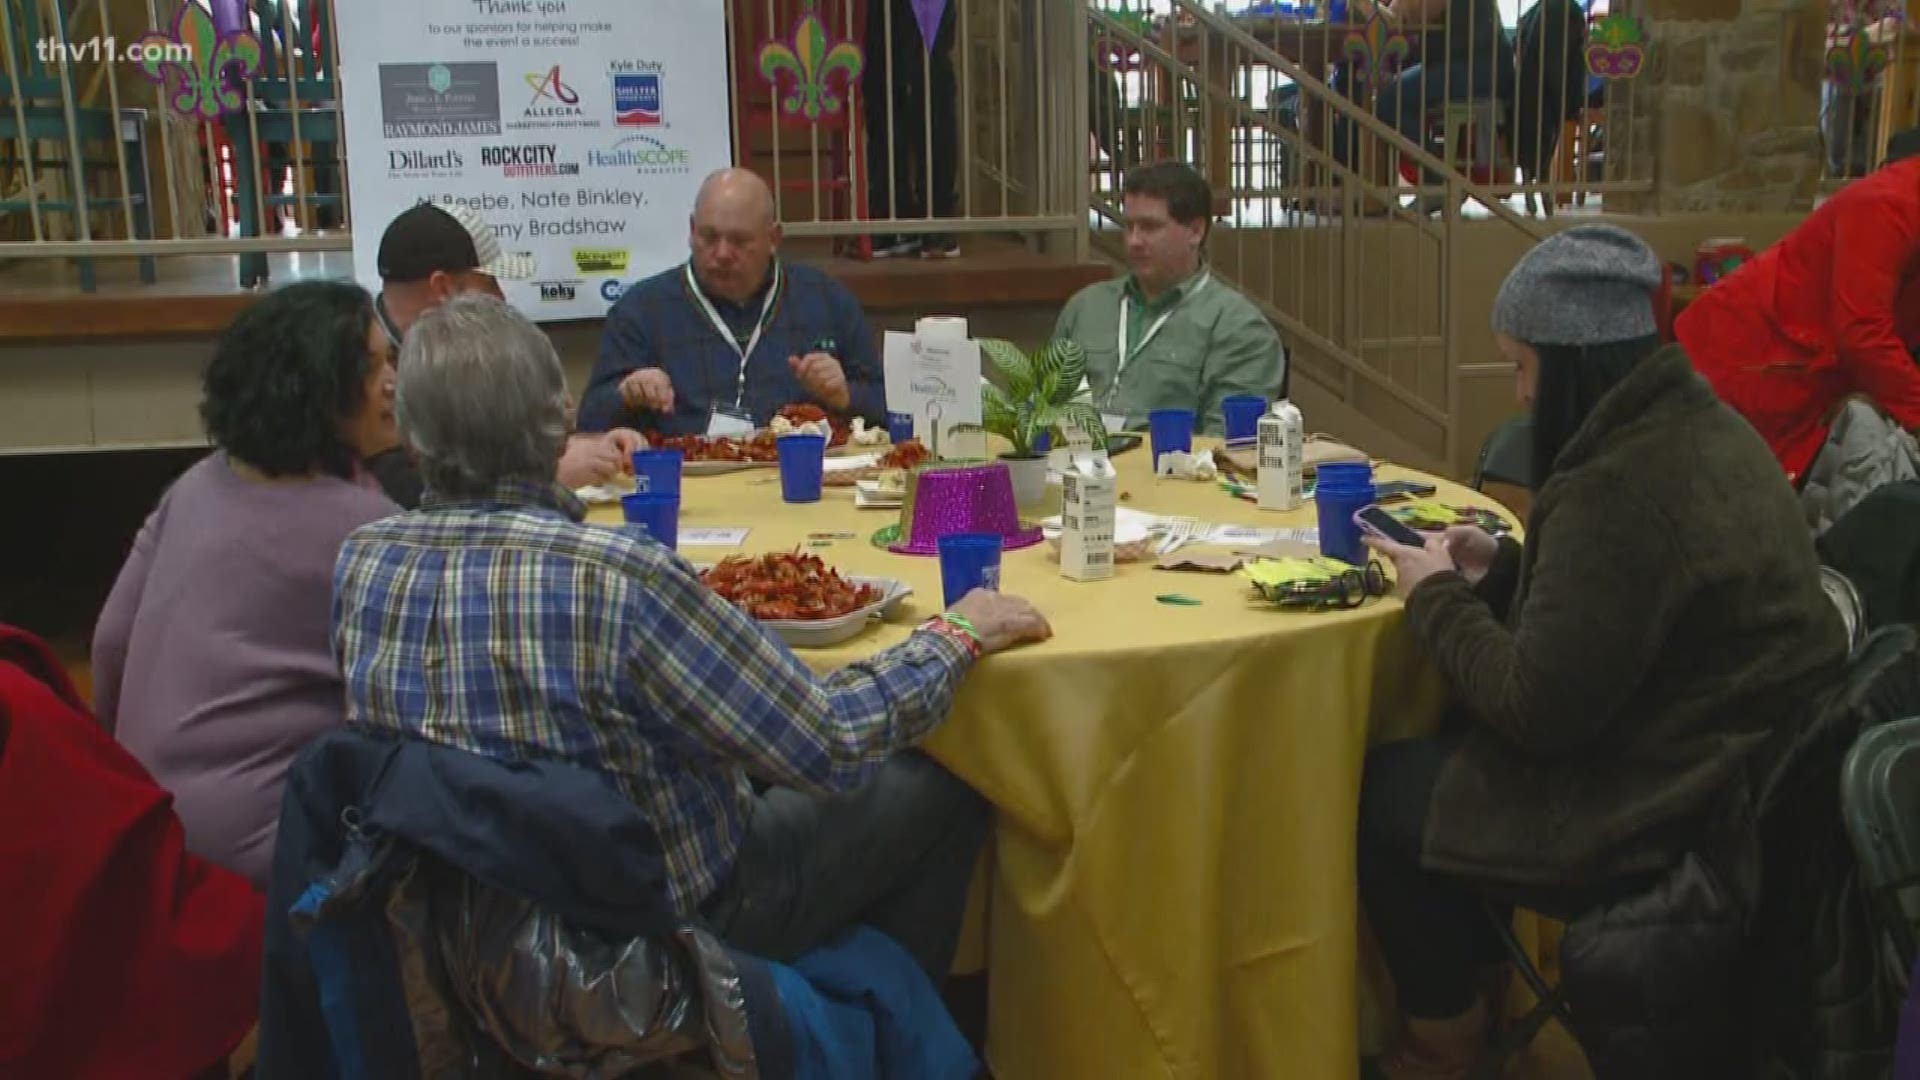 The Little Rock Zoo celebrated Mardi Gras on Sunday, March 3, with its first ever "Mardi Craw" party and crawfish boil.